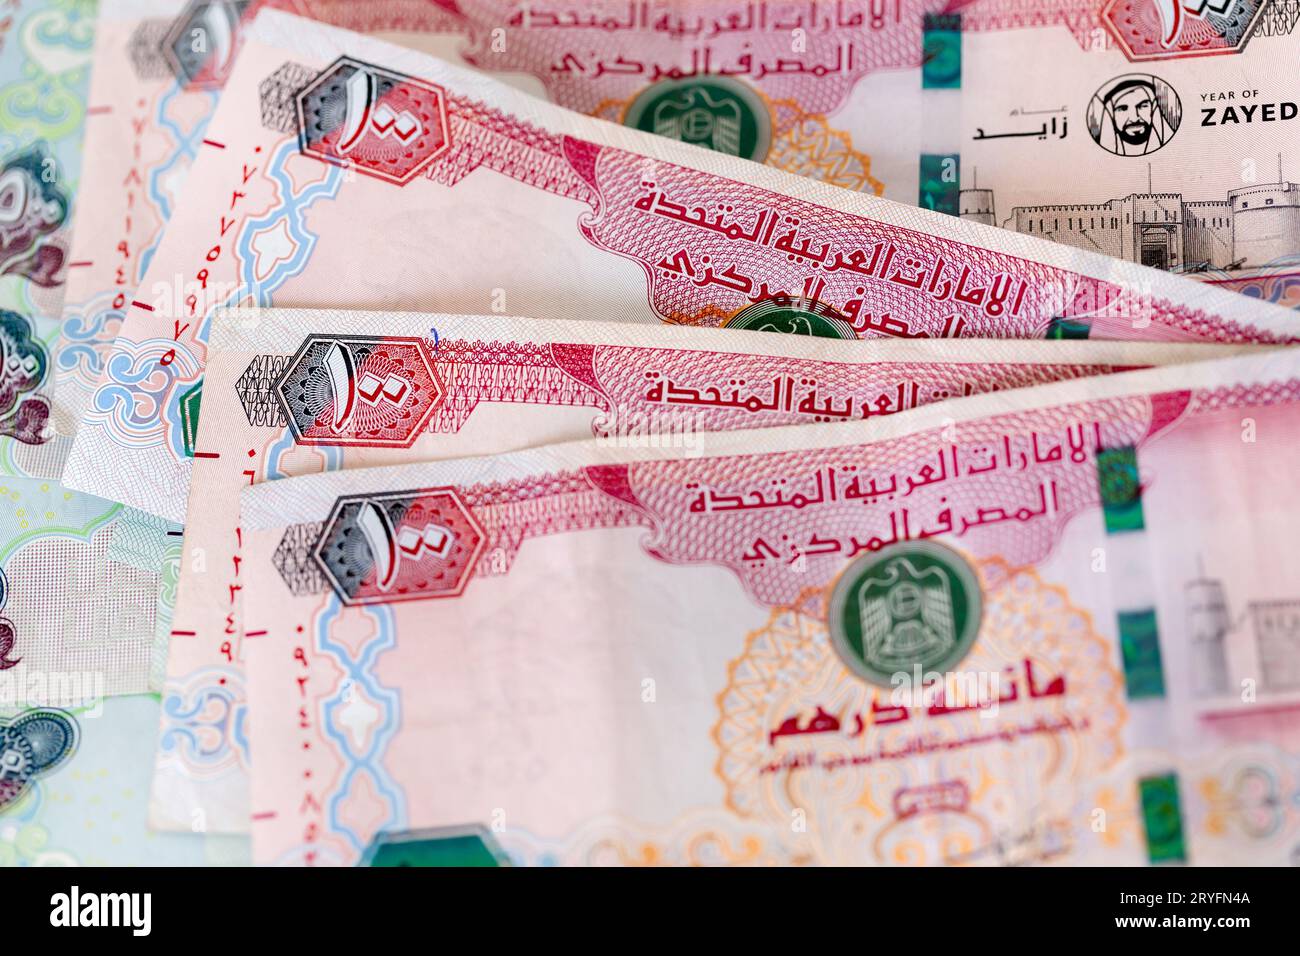 UAE dirhams, paper money, one and five hundred dirhams banknotes, closeup view Stock Photo